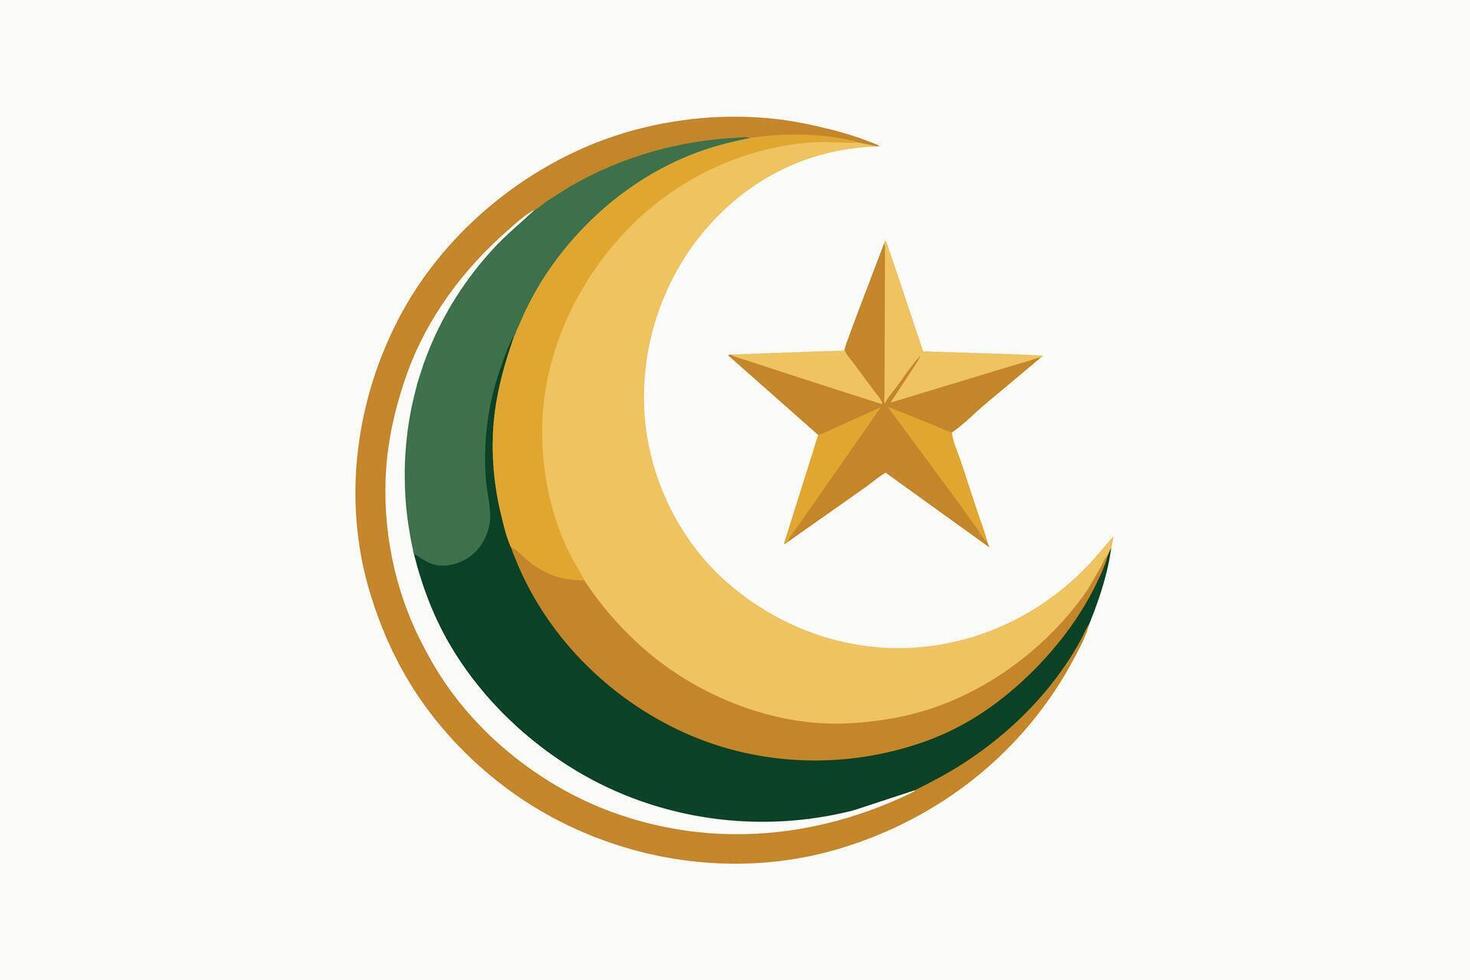 A stylized crescent moon and star, iconic symbols of Islam vector